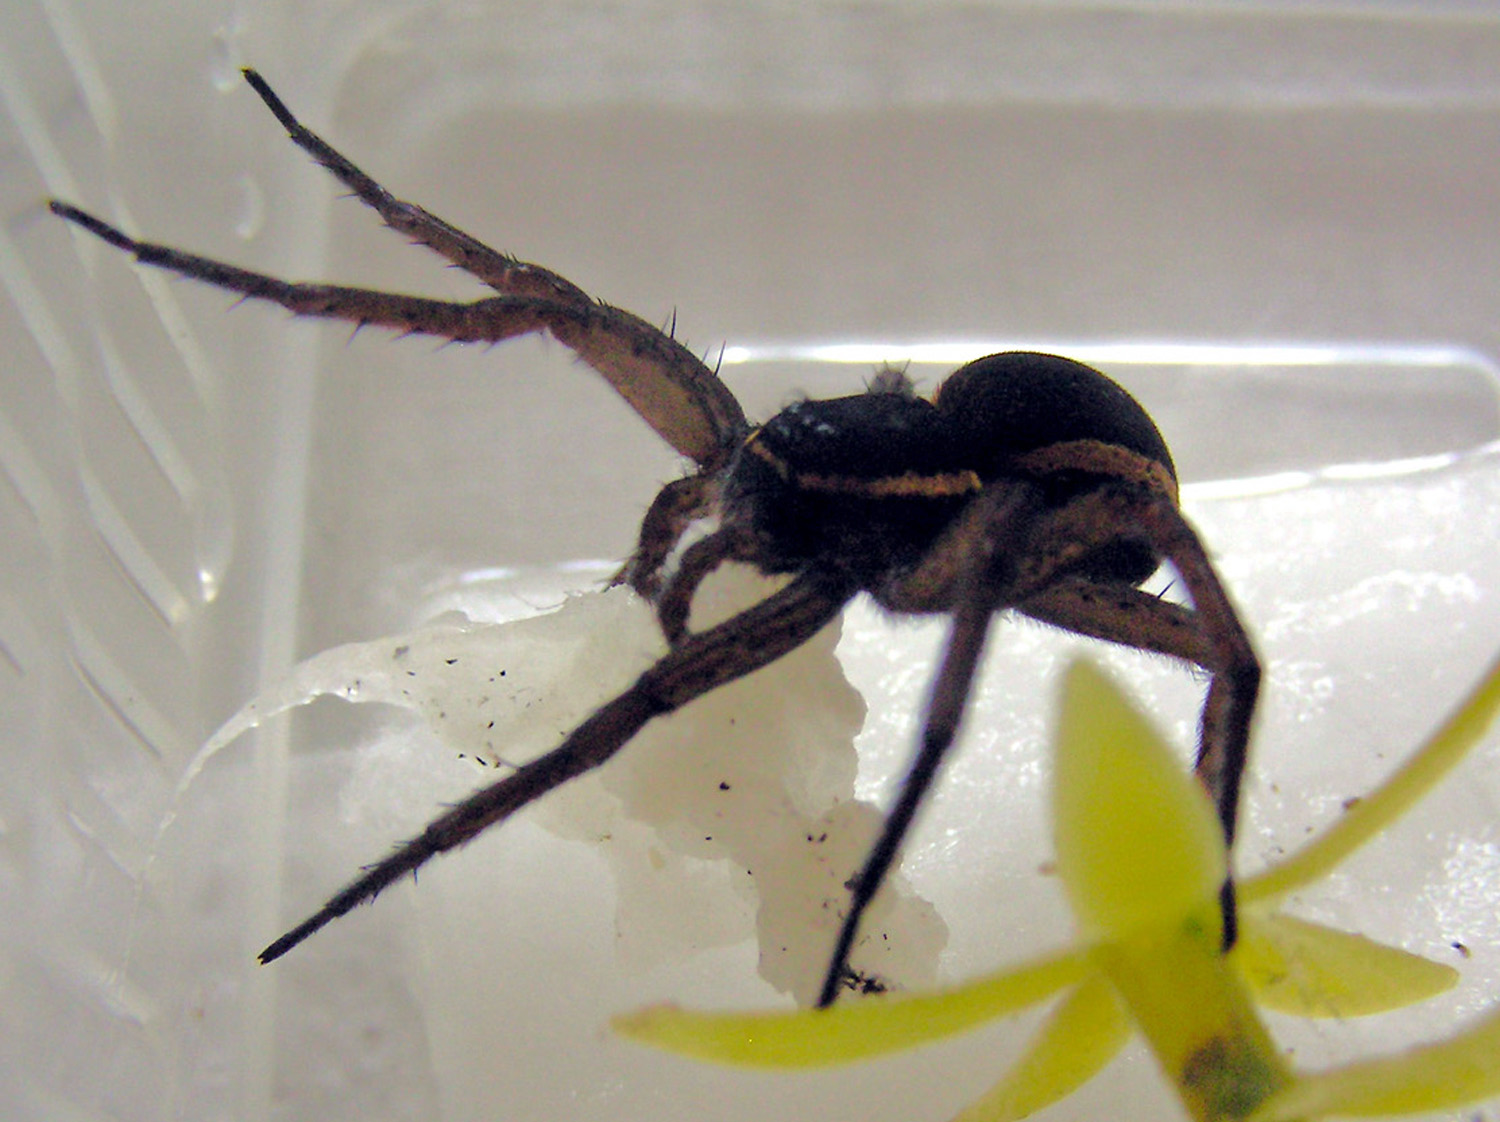 Female D. plantarius carrying cotton wool in lieu of an egg sac in captivity